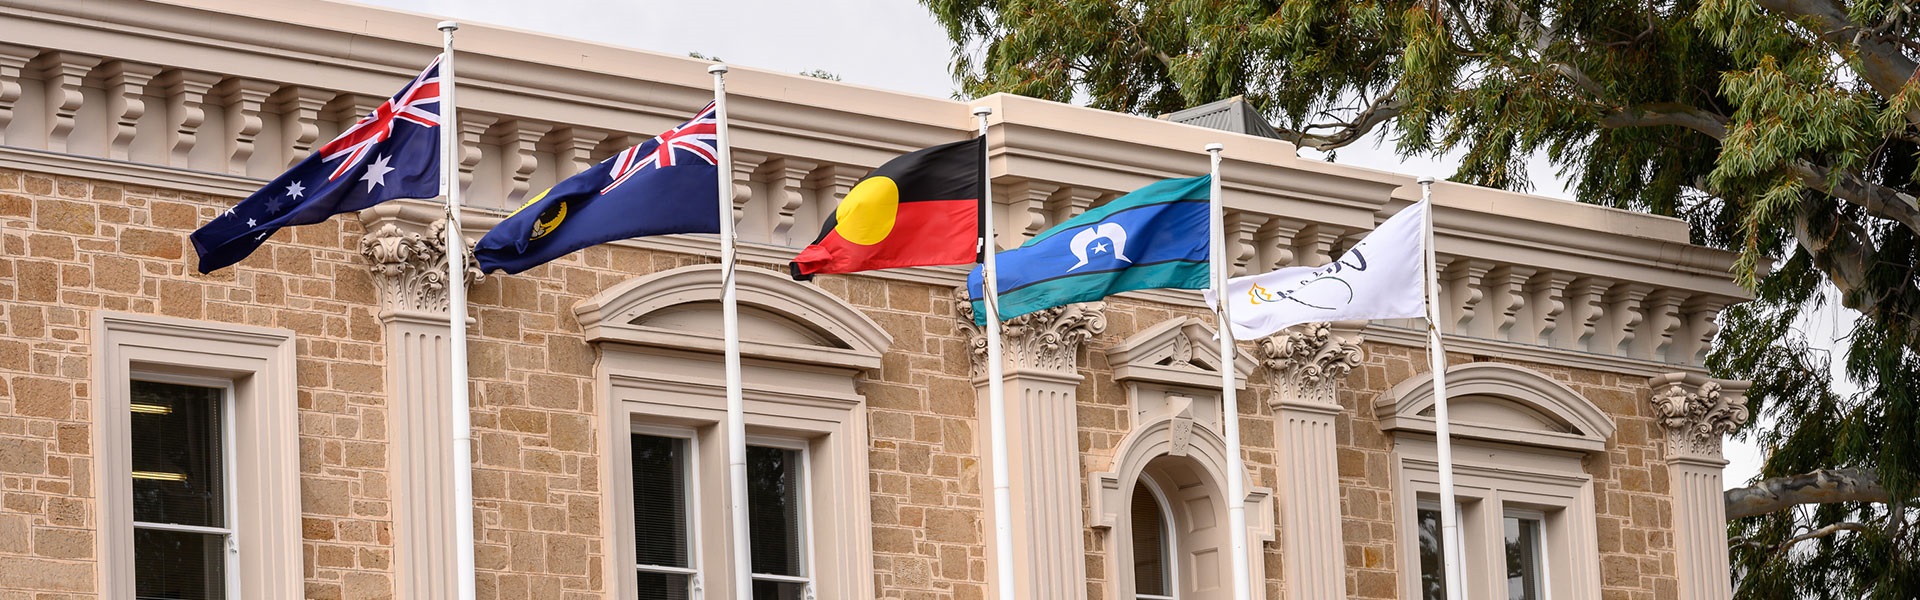 Flags flying in front of the Unley Town Hall